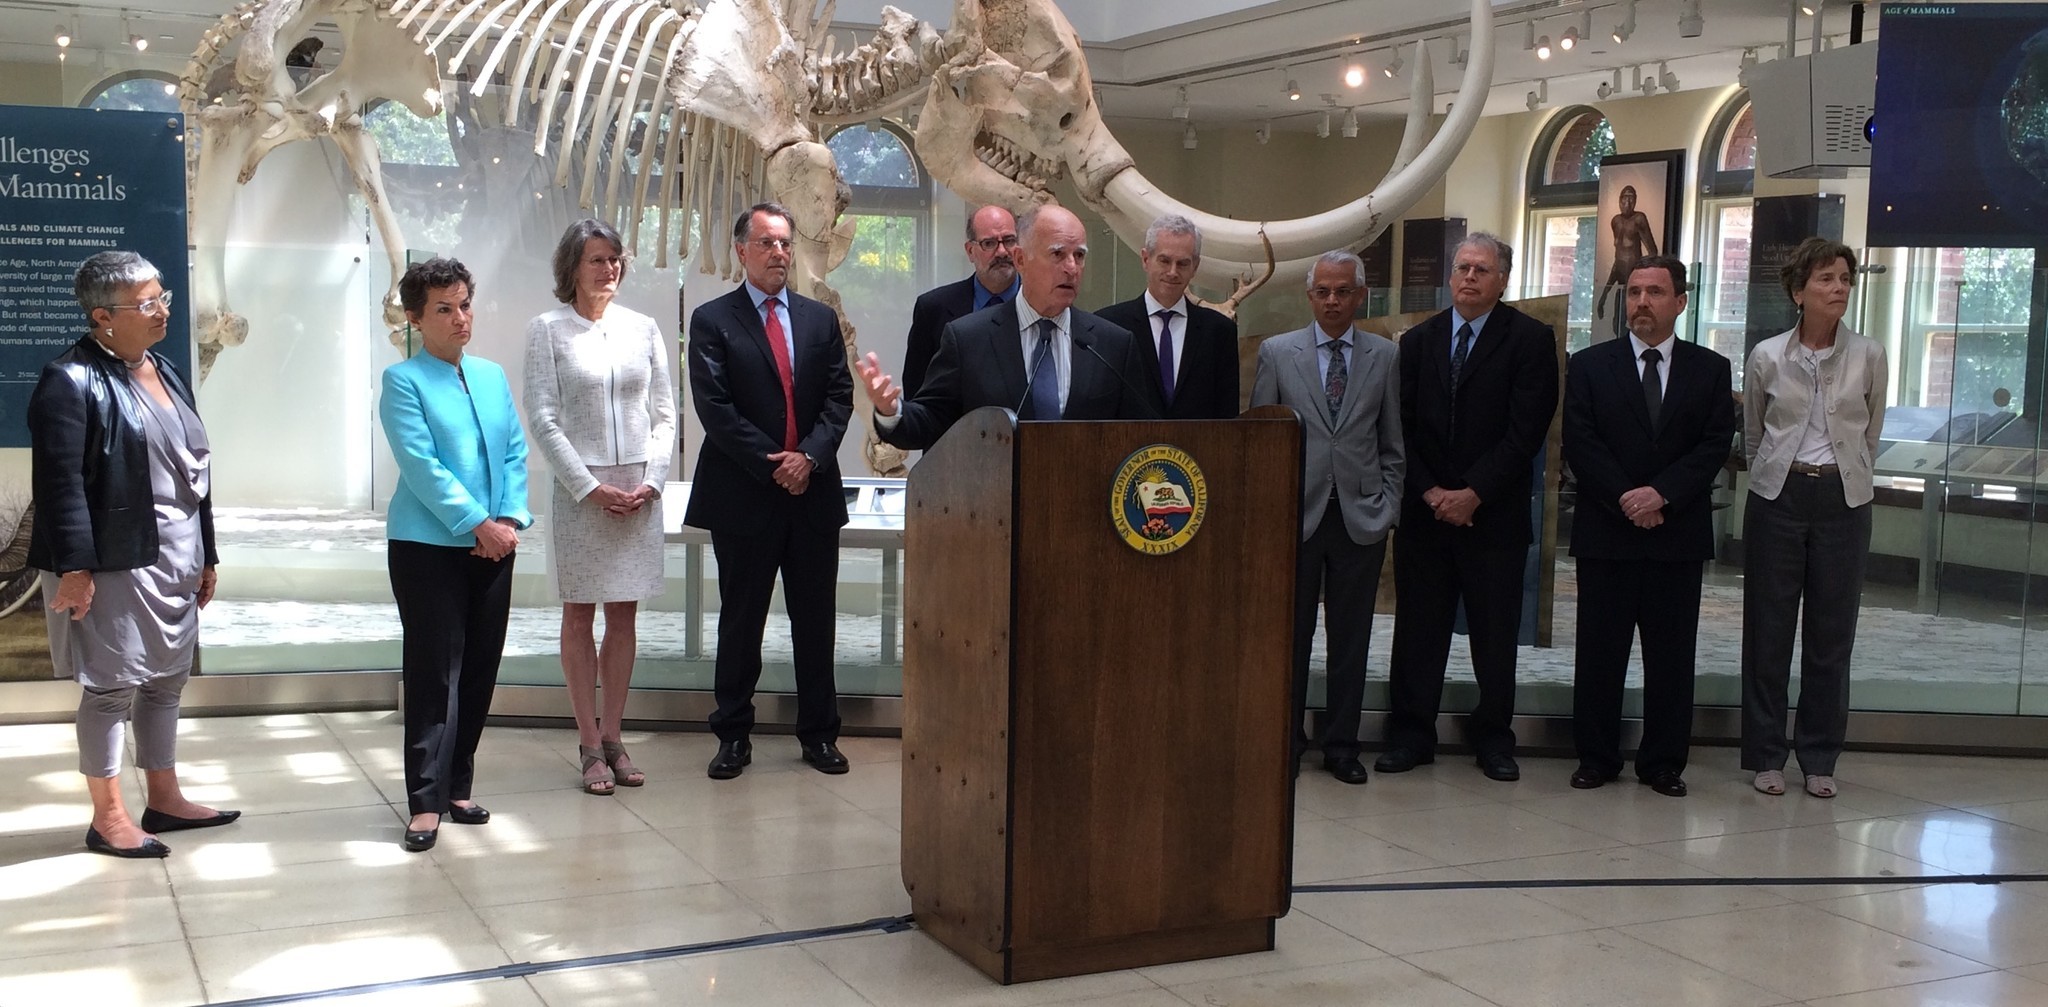 Gov. Jerry Brown with several scientists, including Mary Nichols, chair of the California Air Resources Board, far left, and Christiana Figueres, the top United Nations official on climate change, second from left, at the Natural History Museum in Los Angeles in June.  (Samer Momani / Caltrans)